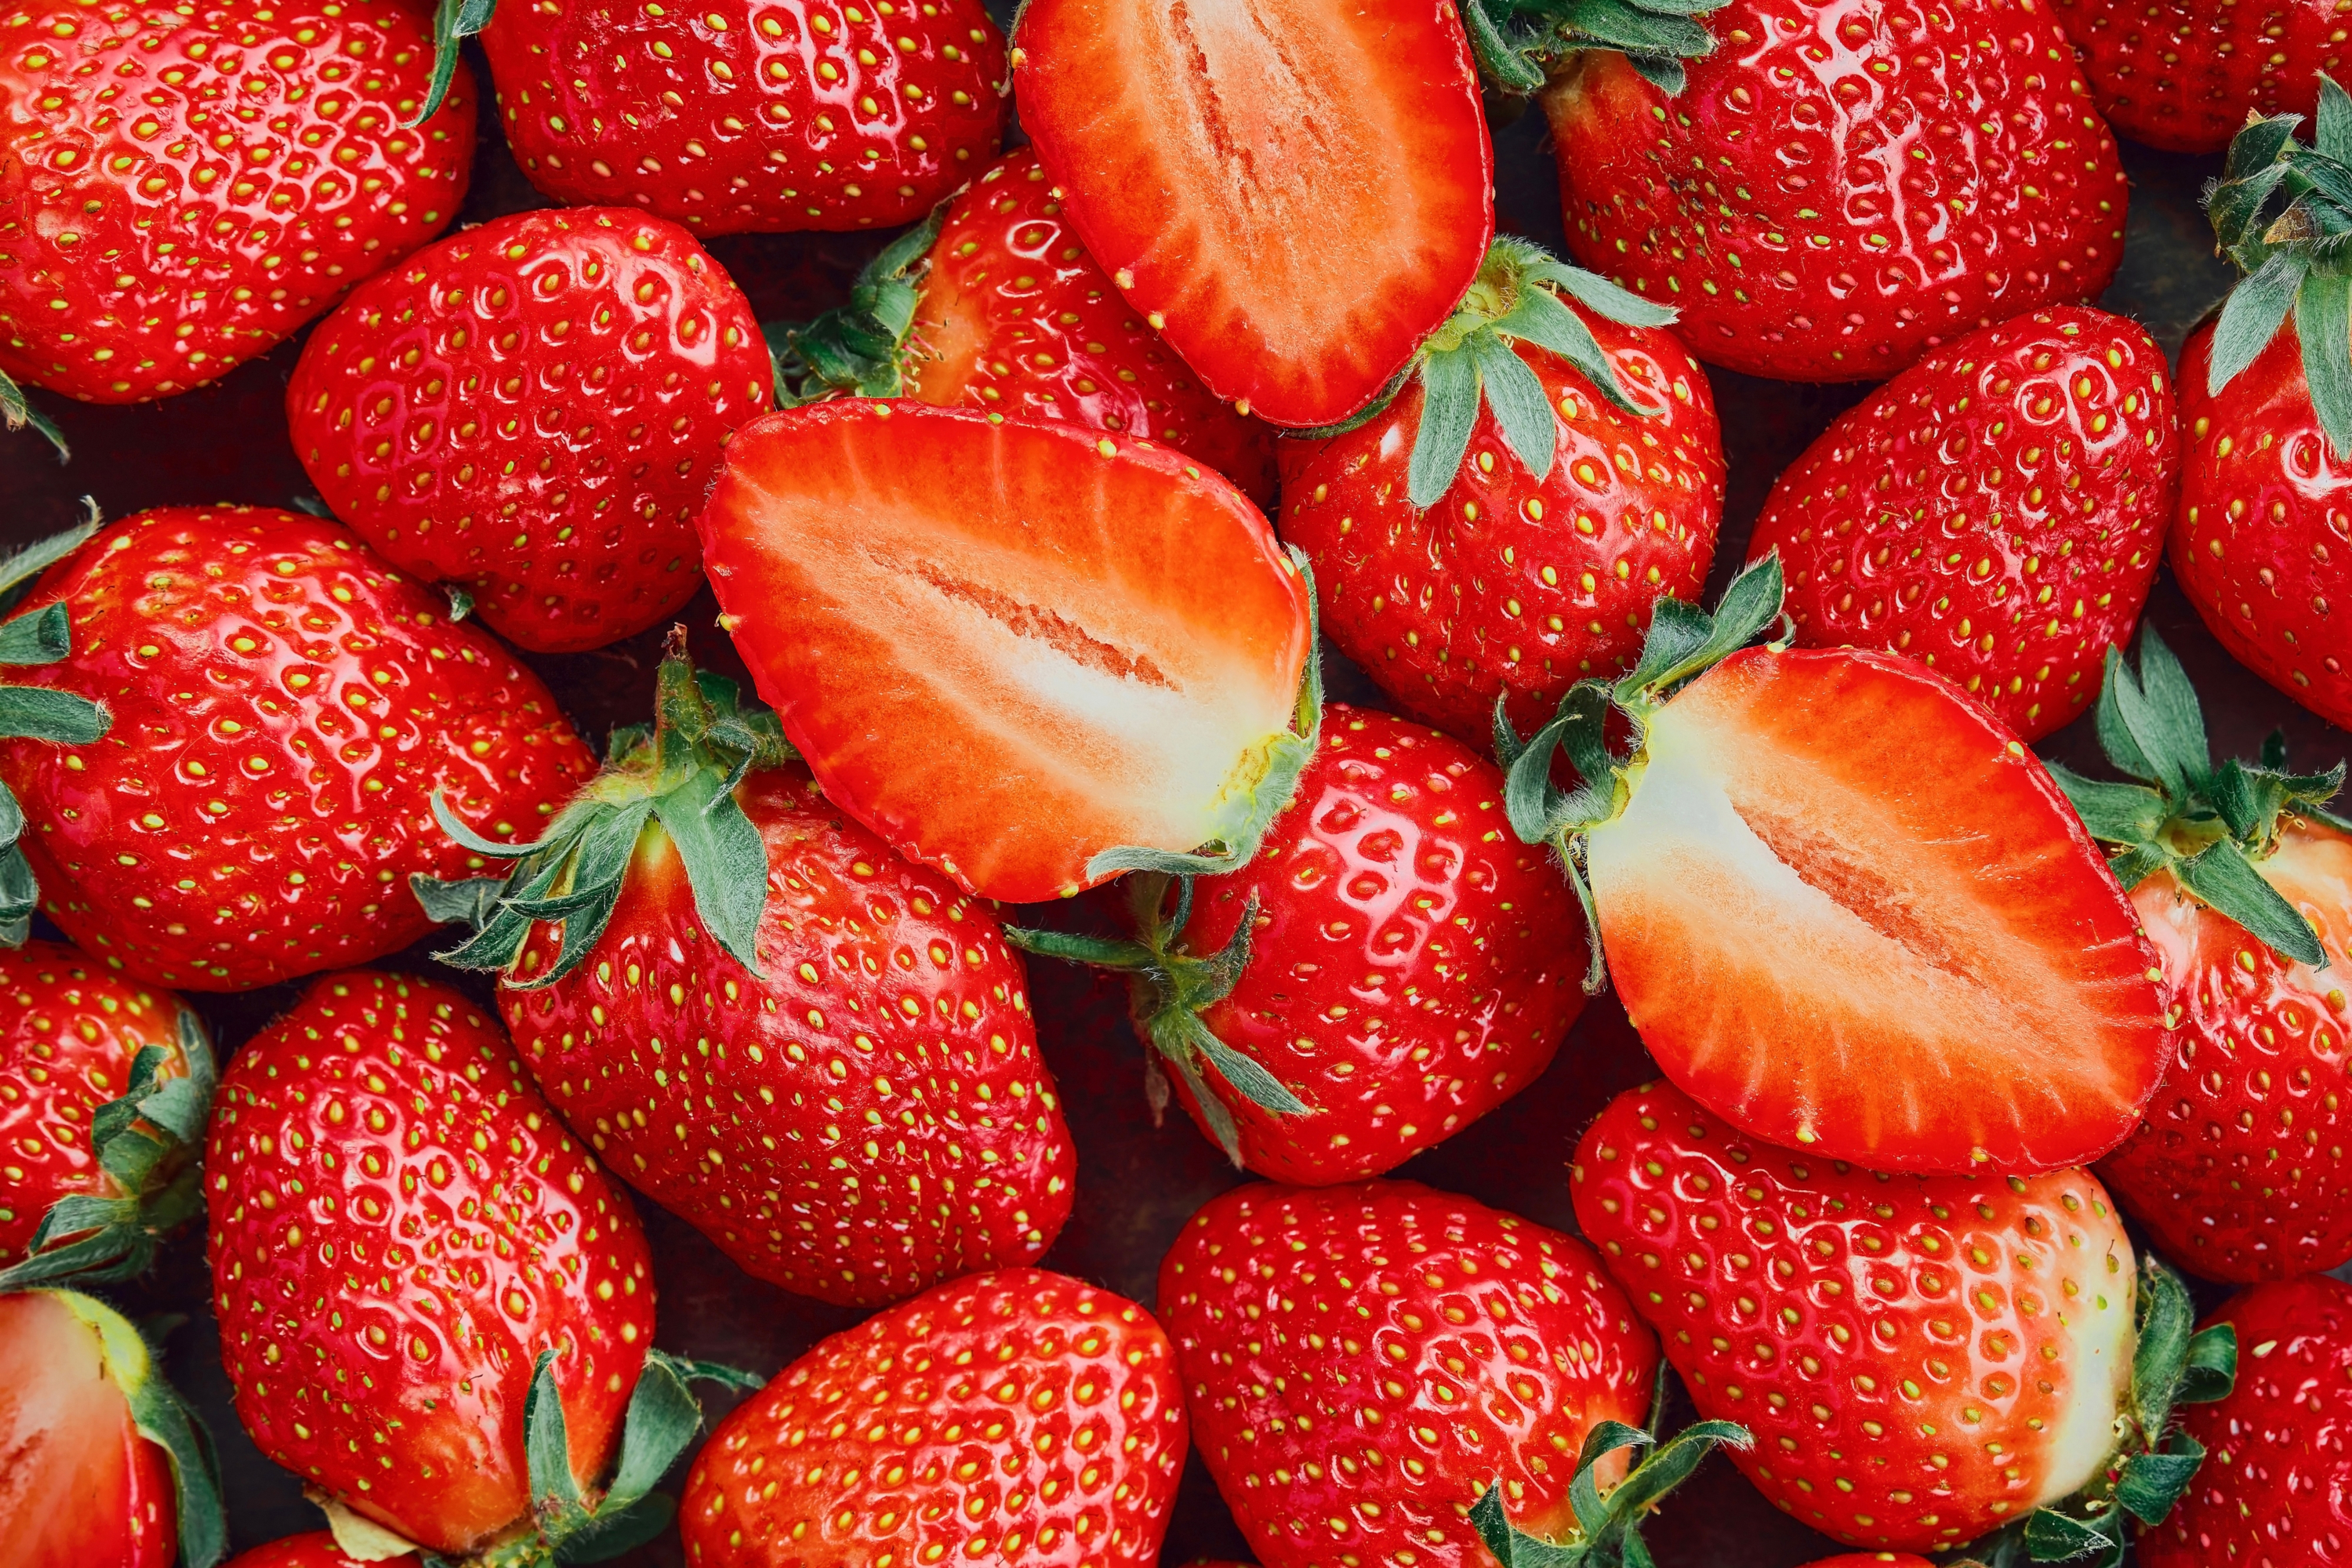 Strawberry Mobile Phone Wallpaper Images Free Download on Lovepik   400297871